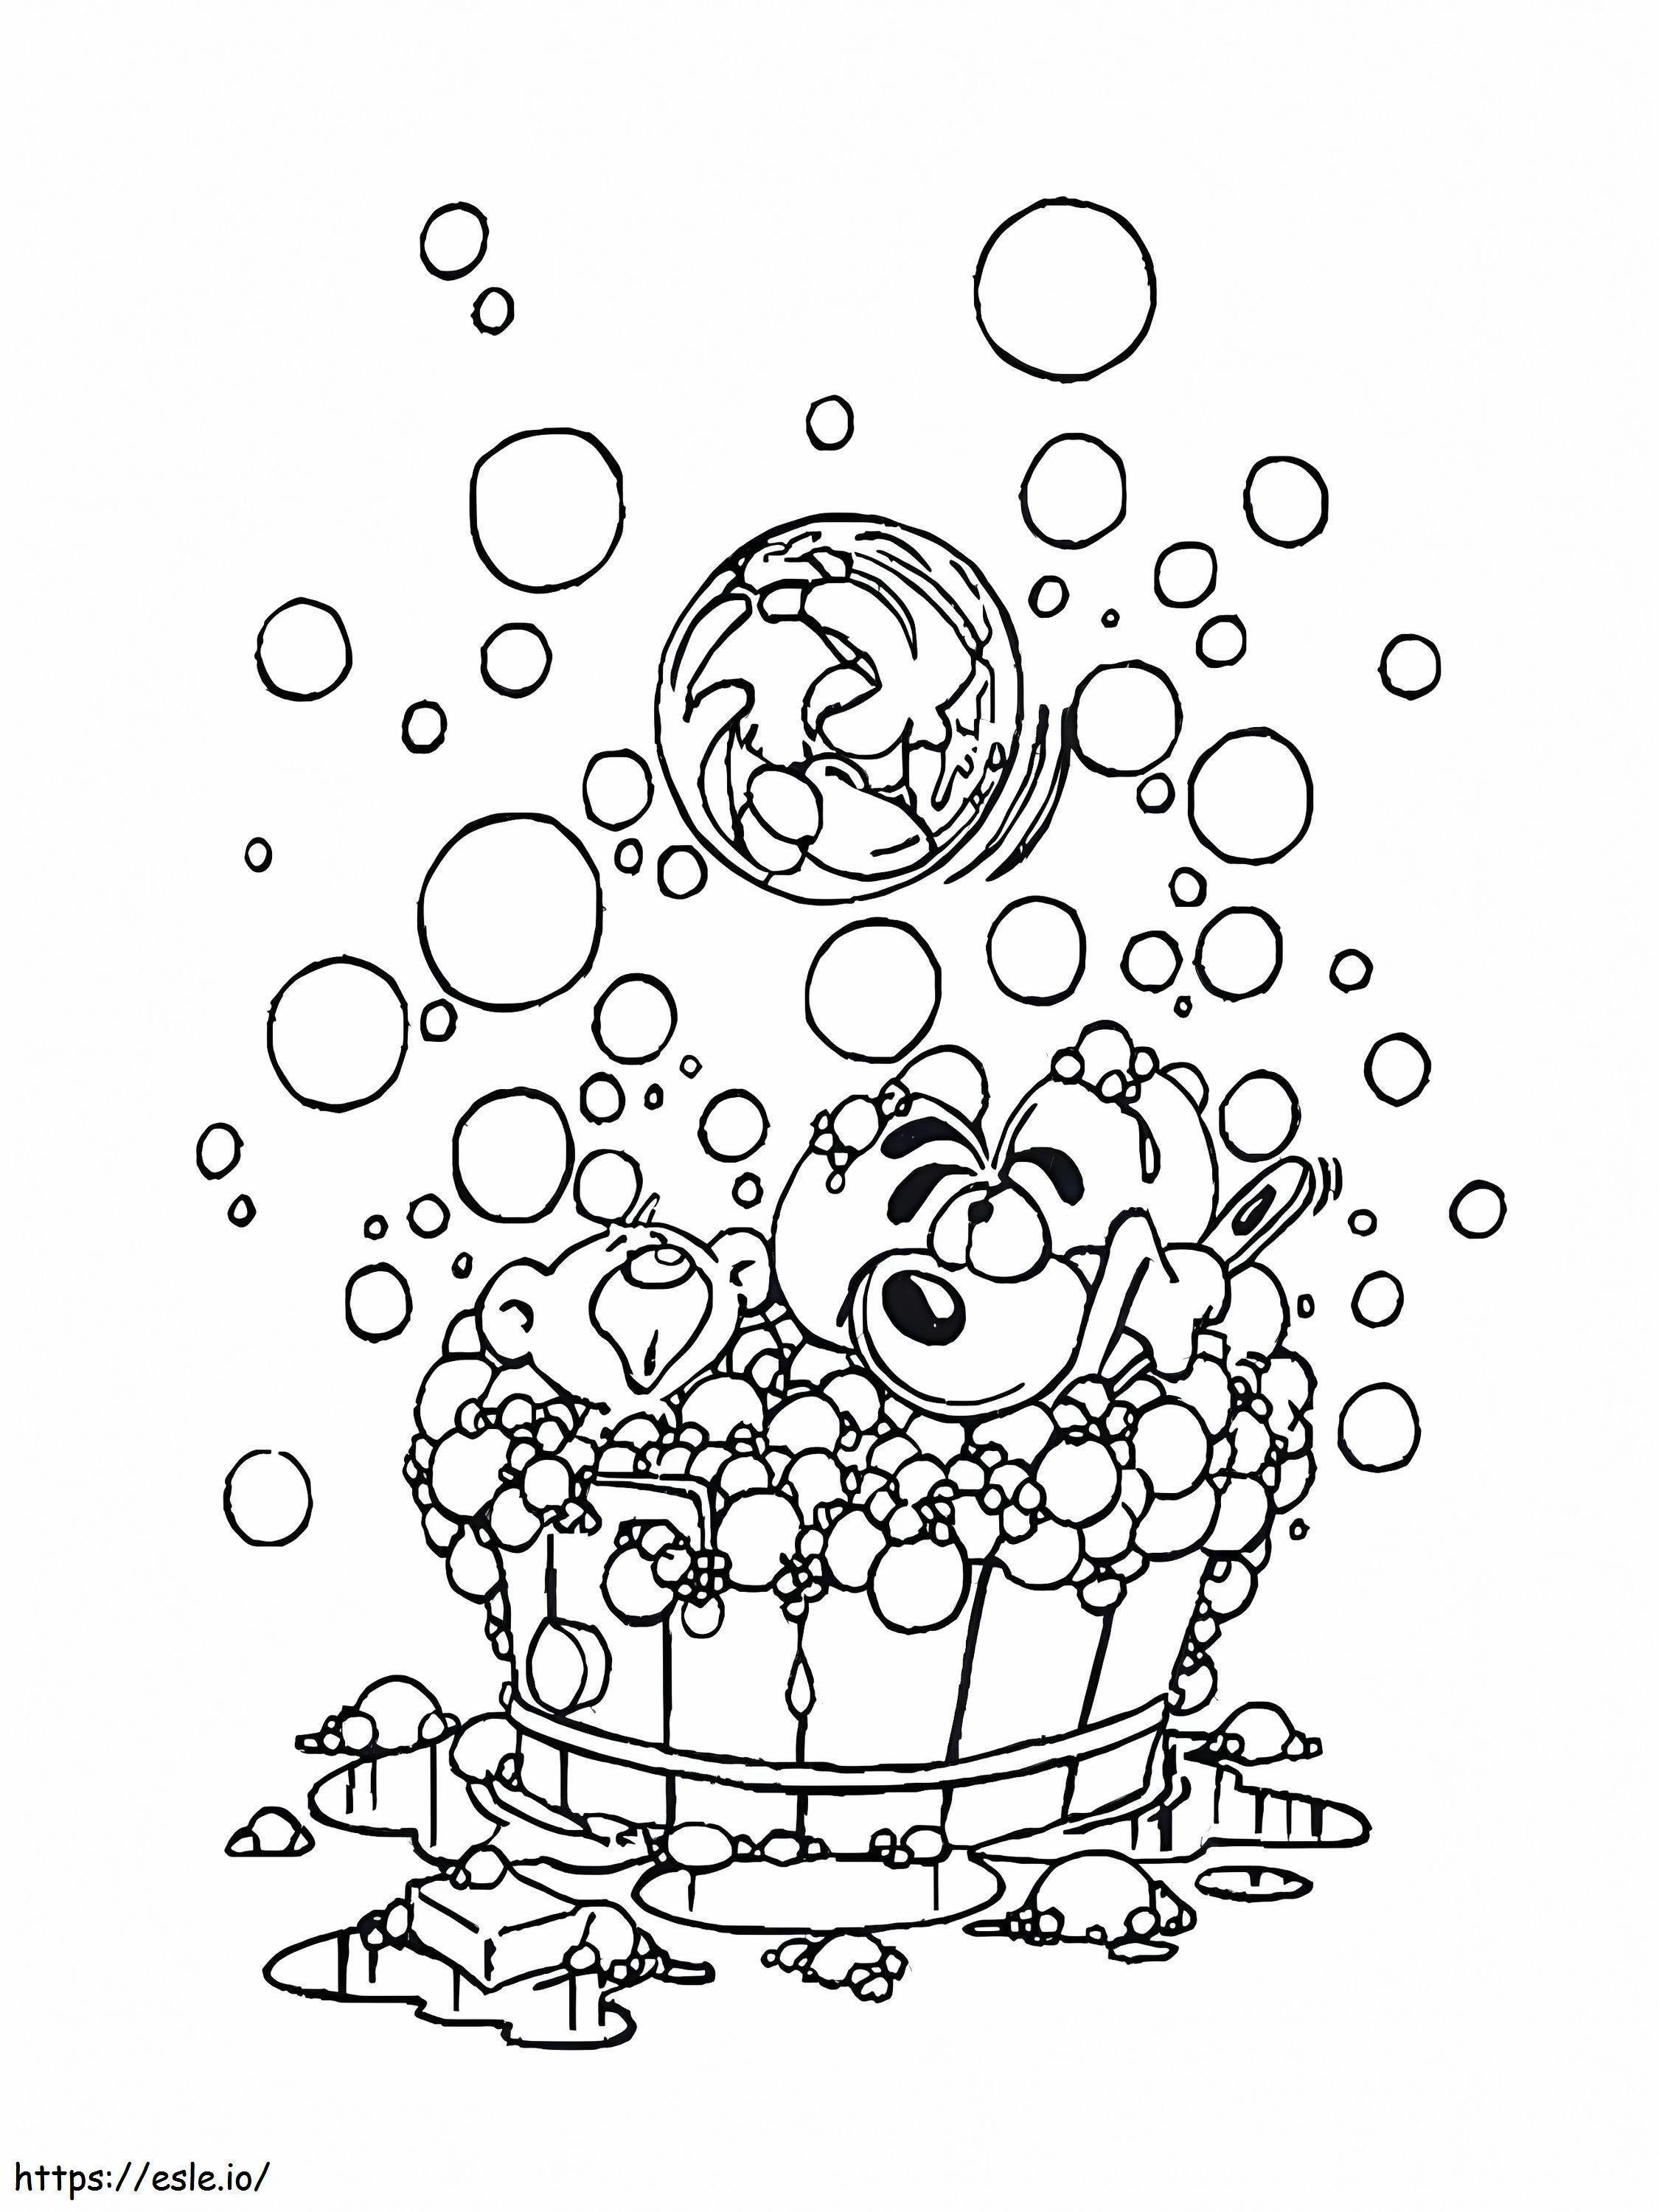 Diddle Showering coloring page